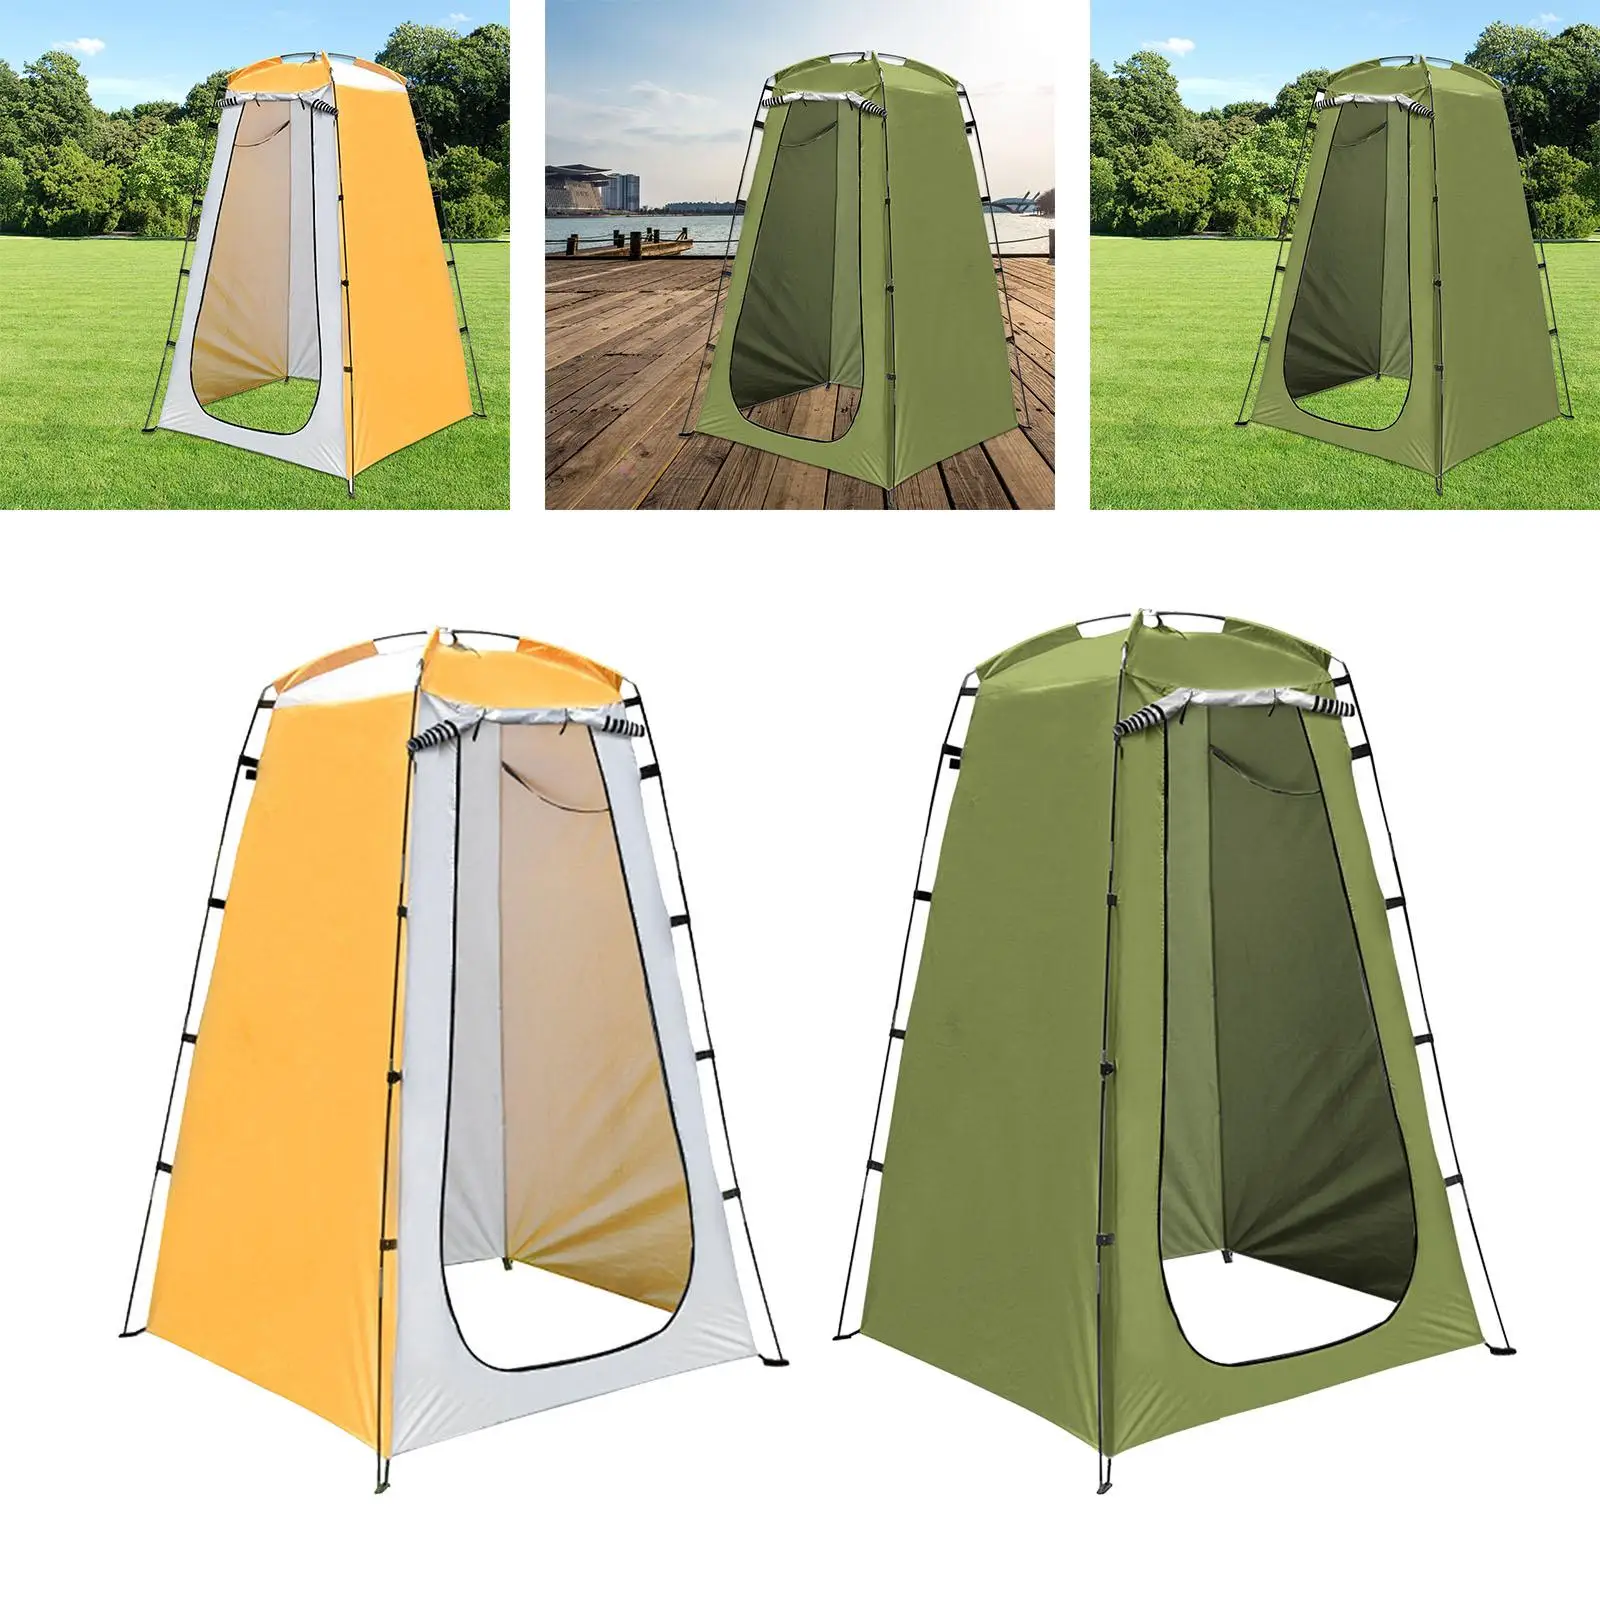 

Privacy Tent for Single Person Easy Setup Portable Lightweight Mobile Toilet Beach Changing Room for Camping Picnic Hiking RV